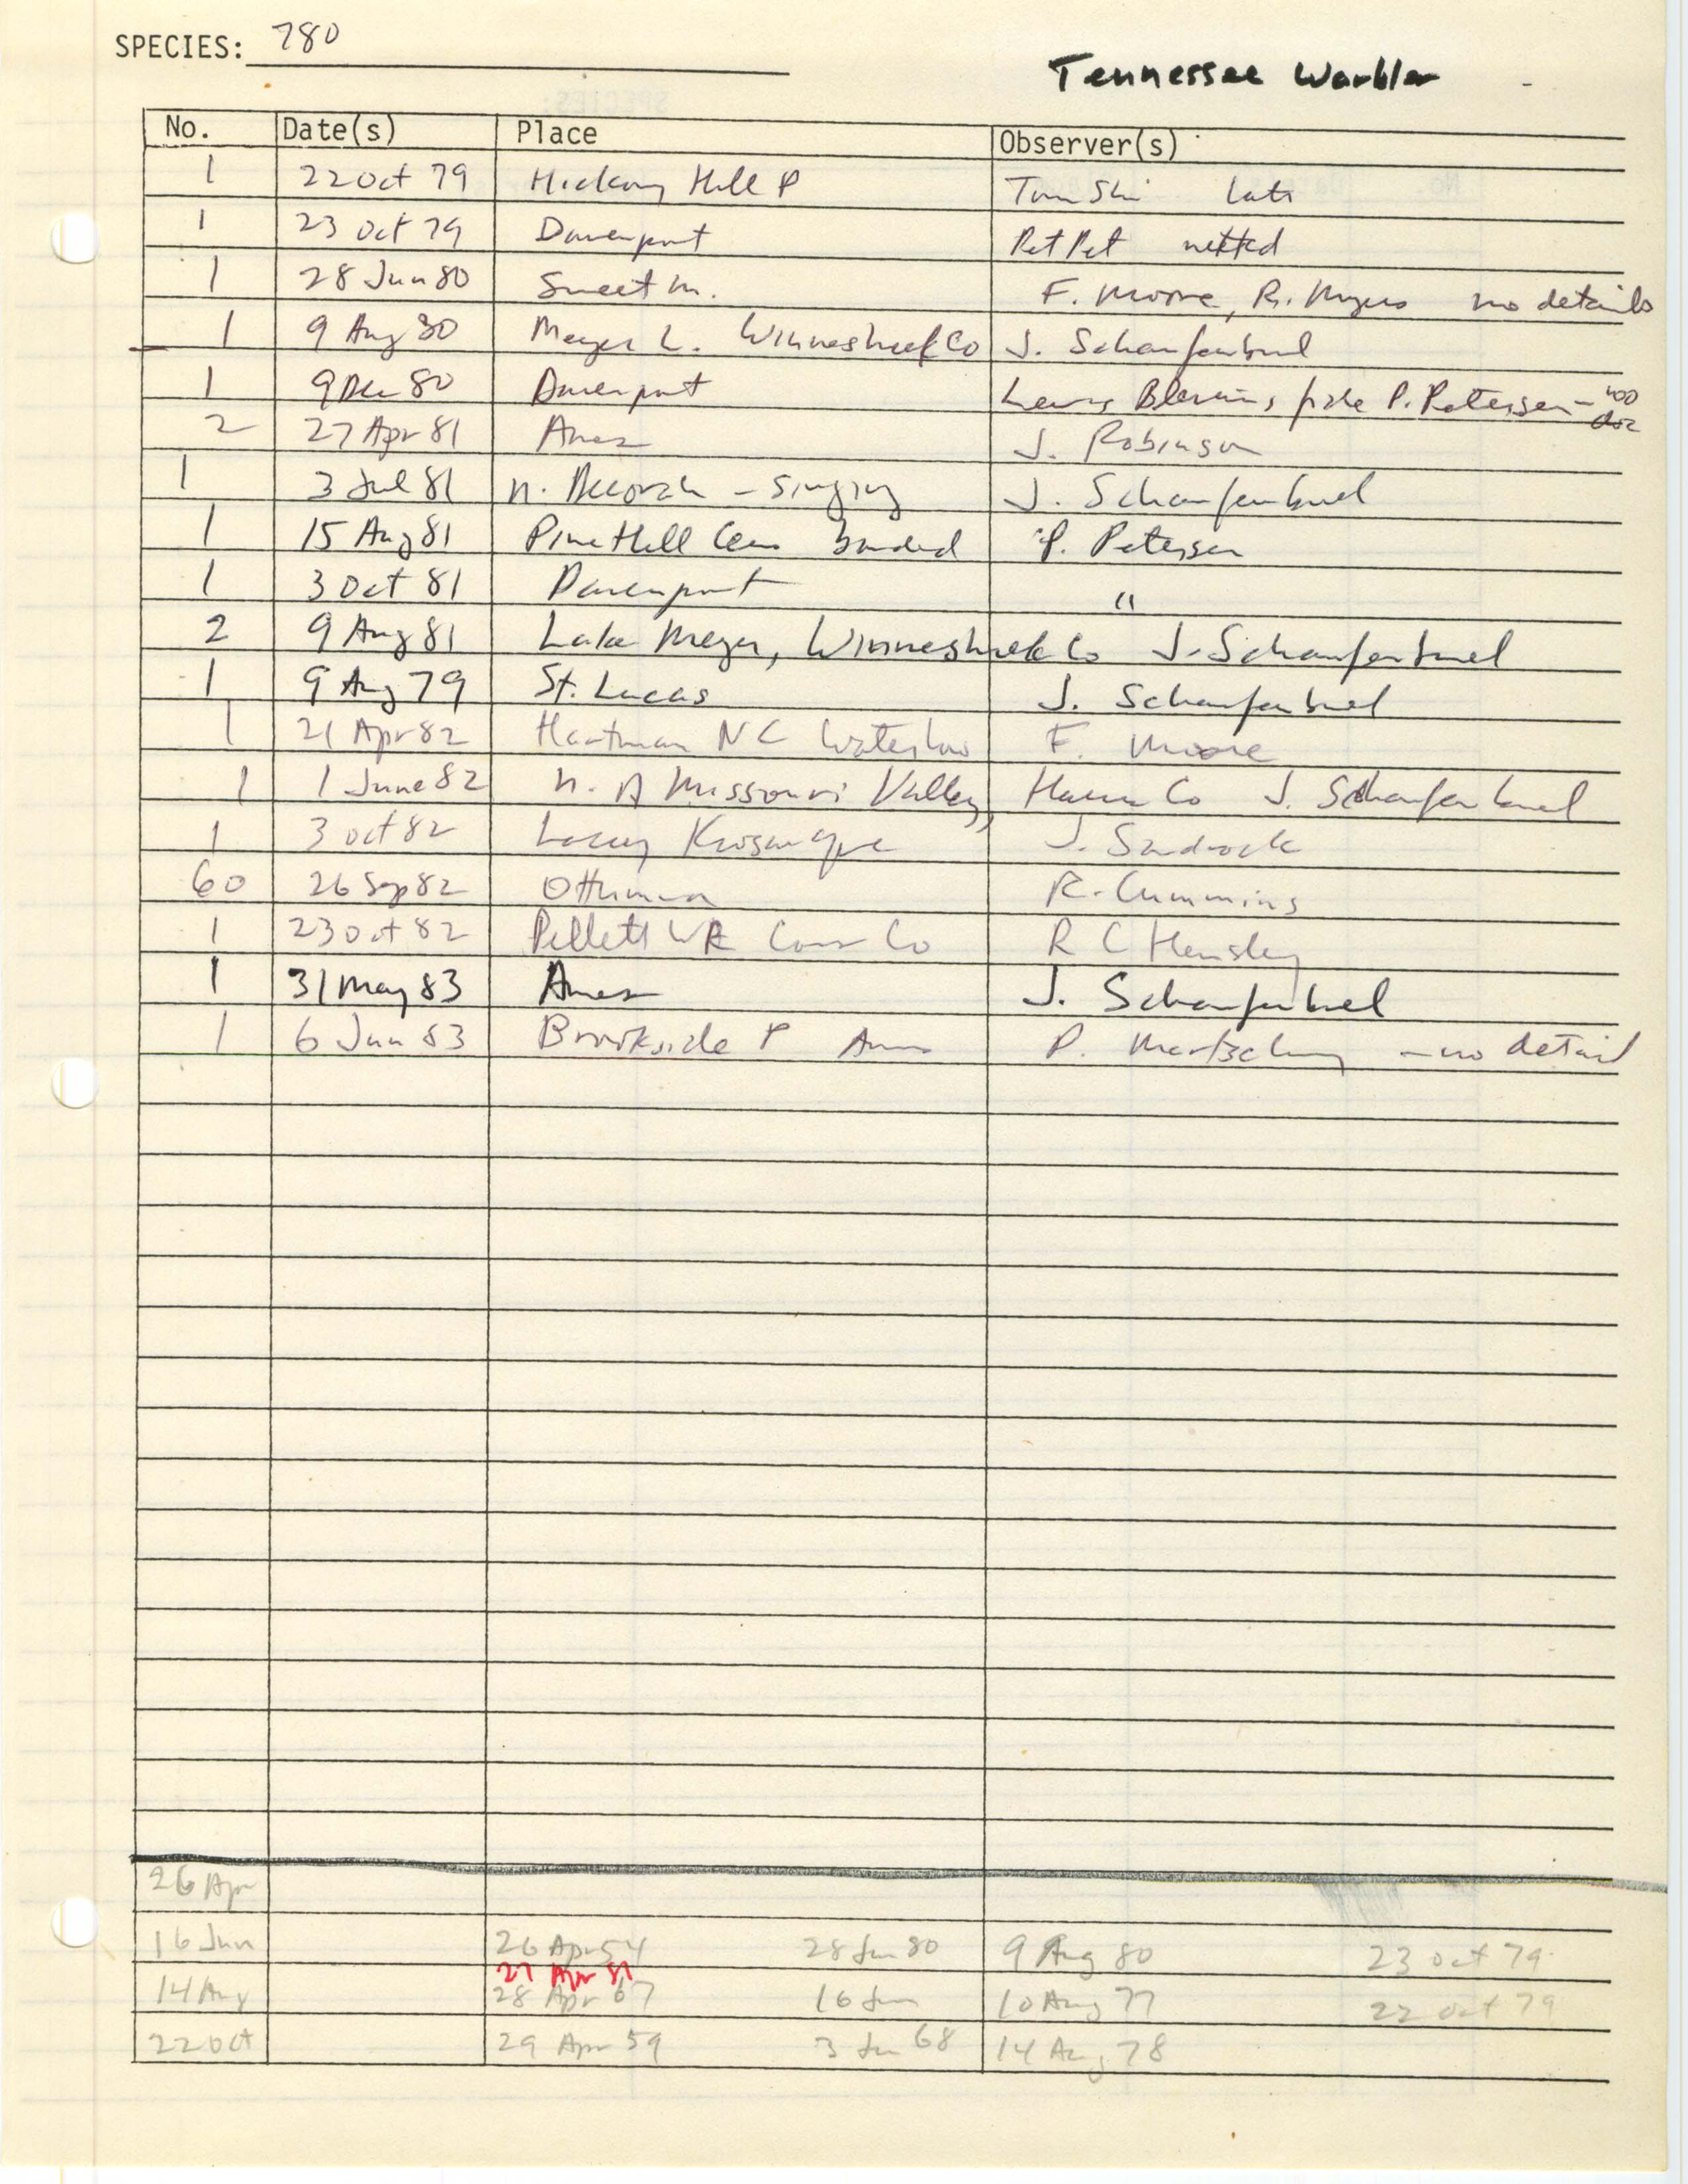 Iowa Ornithologists' Union, field report compiled data, Tennessee Warbler, 1979-1983